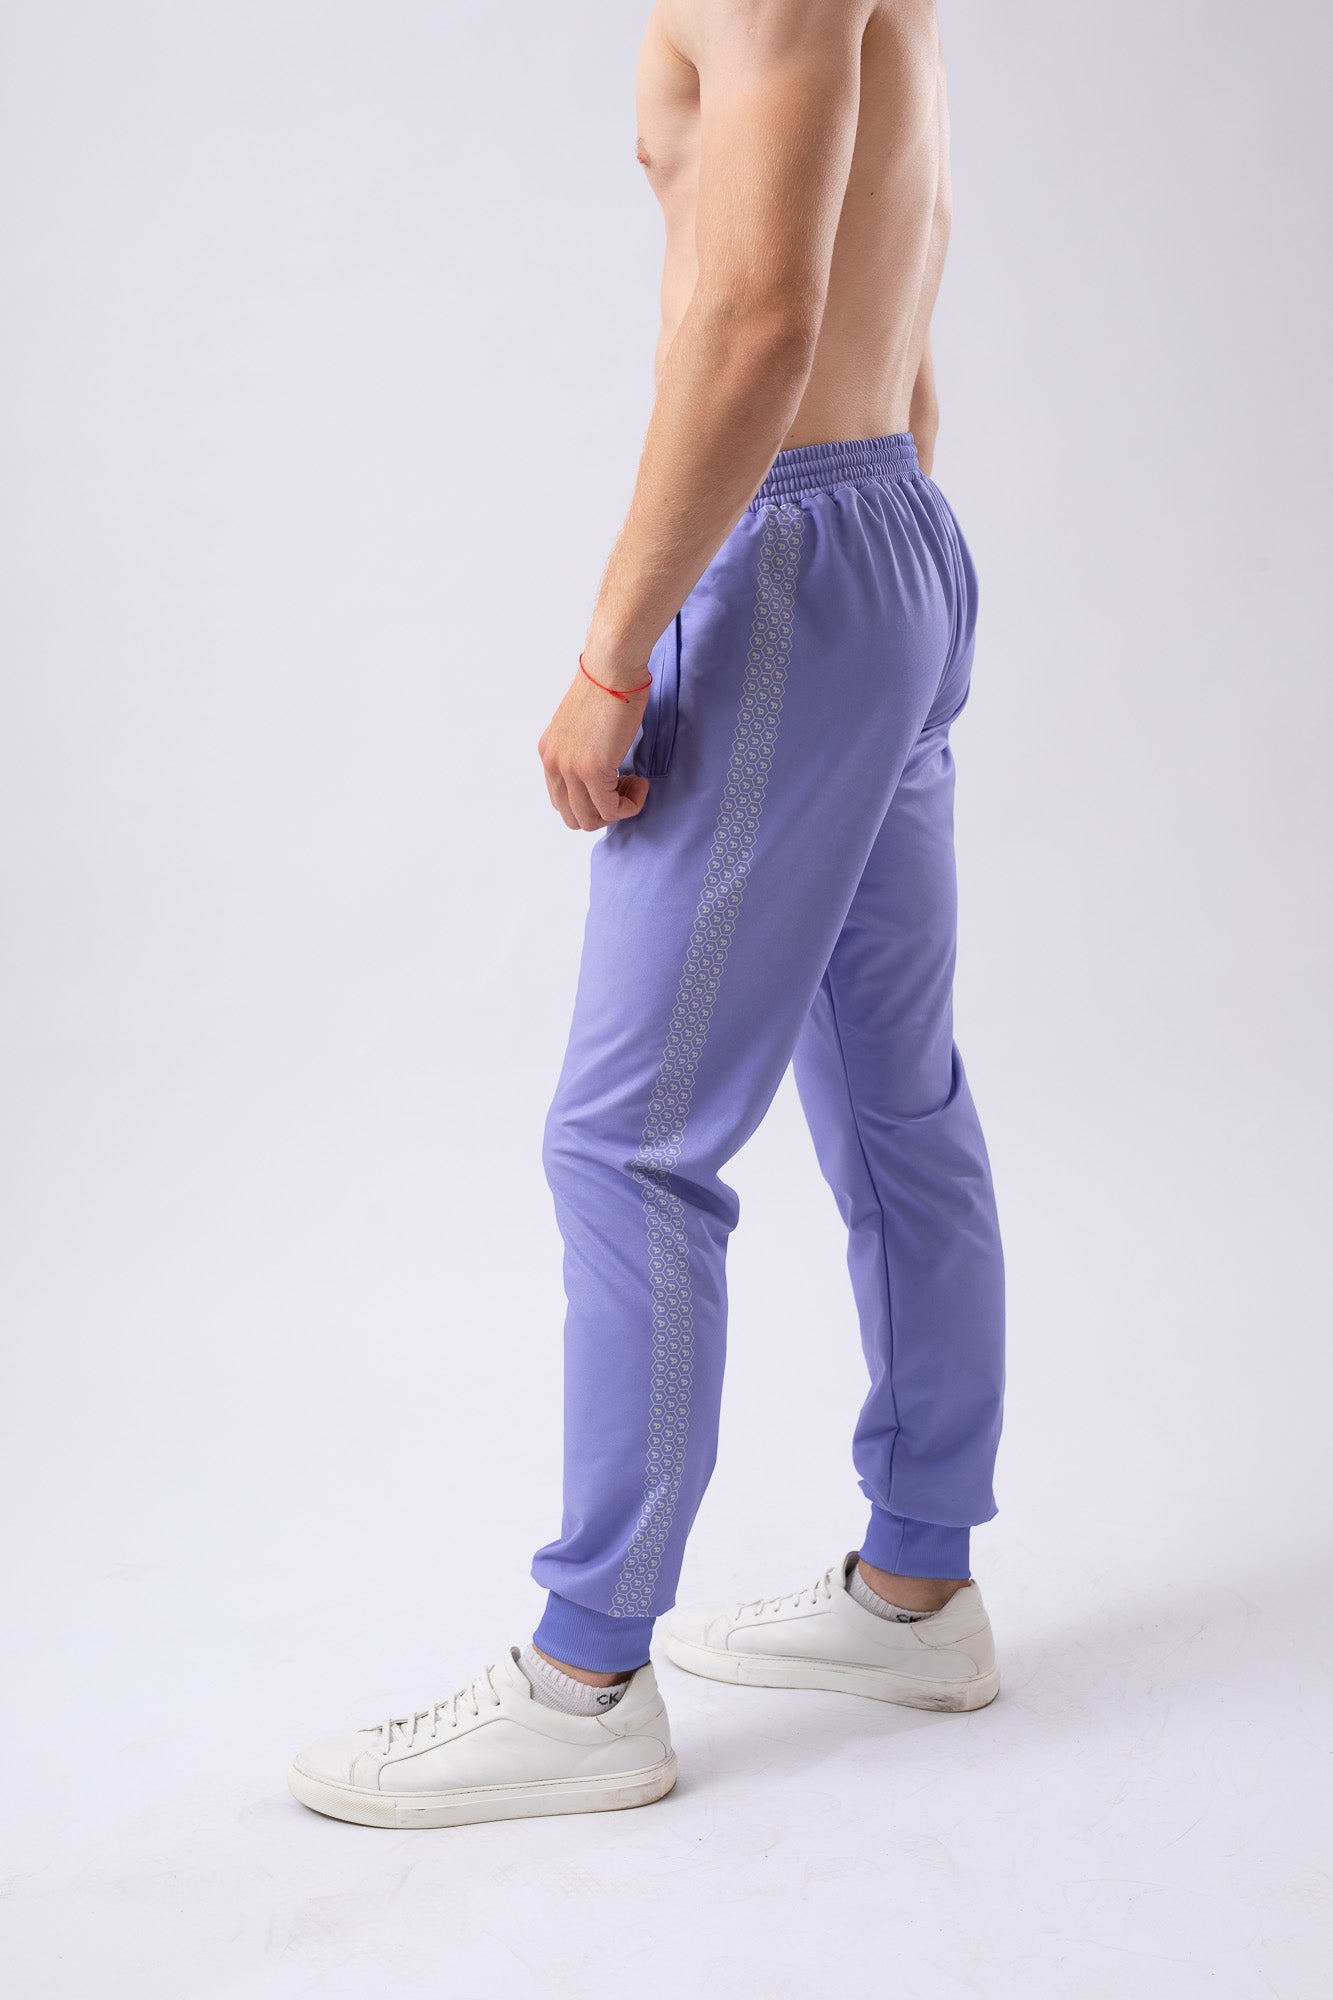 Buy a Adidas Mens Tapered Athletic Track Pants | Tagsweekly